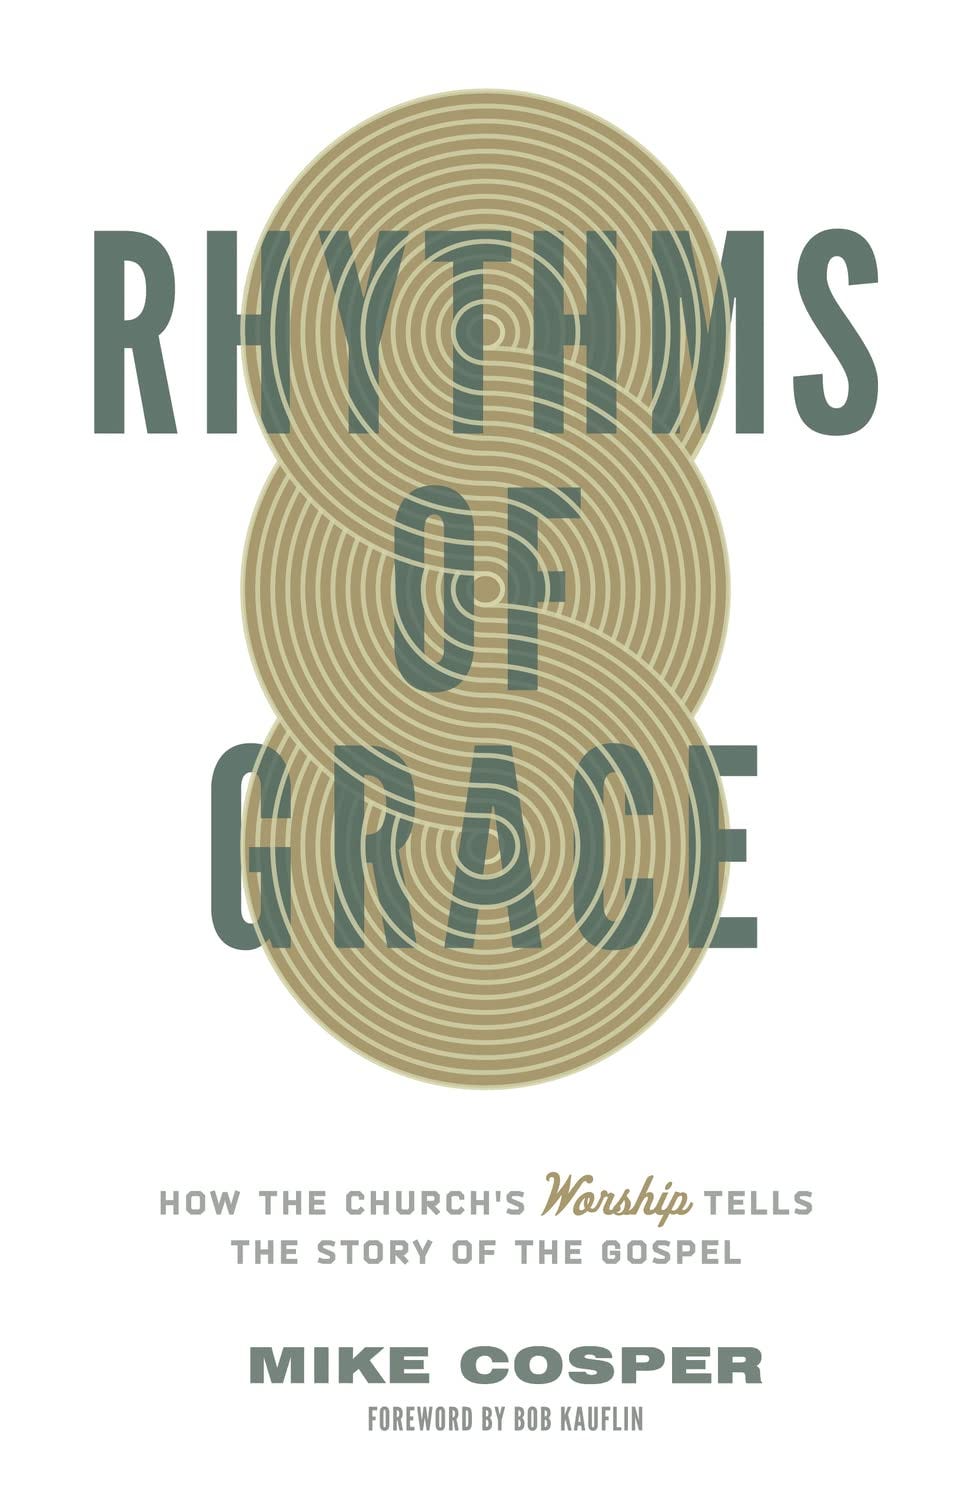 Image of book cover from Rhythms of Grace by Mike Cosper.